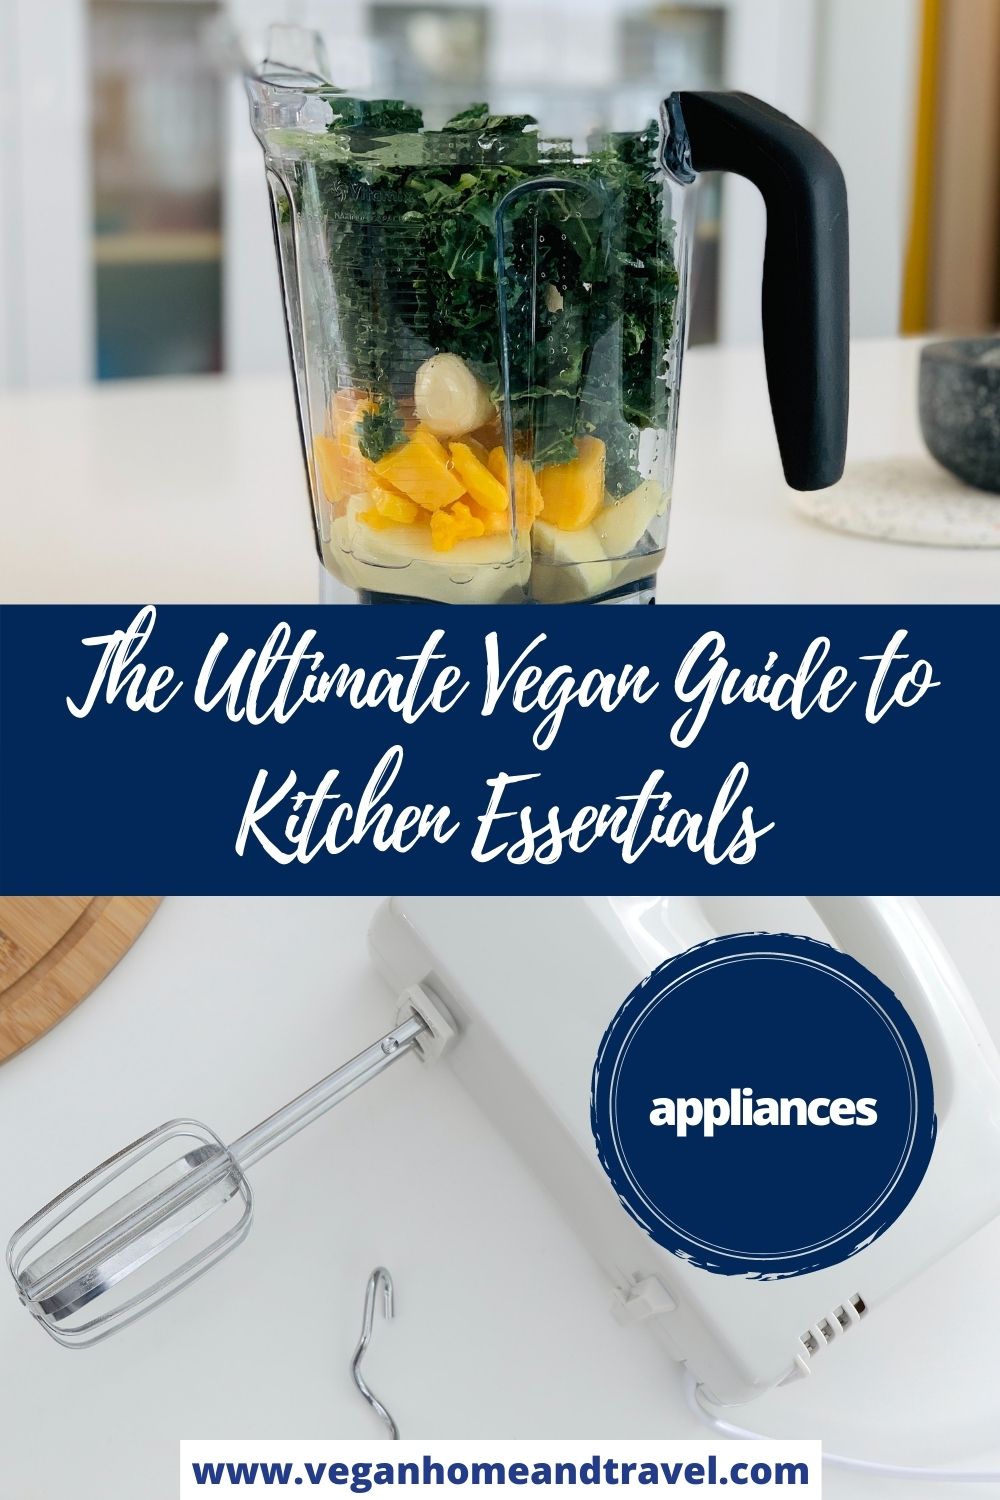 A picture of a a blender and a hand mixer with the text The Ultimate vegan guide to Kitchen essentials